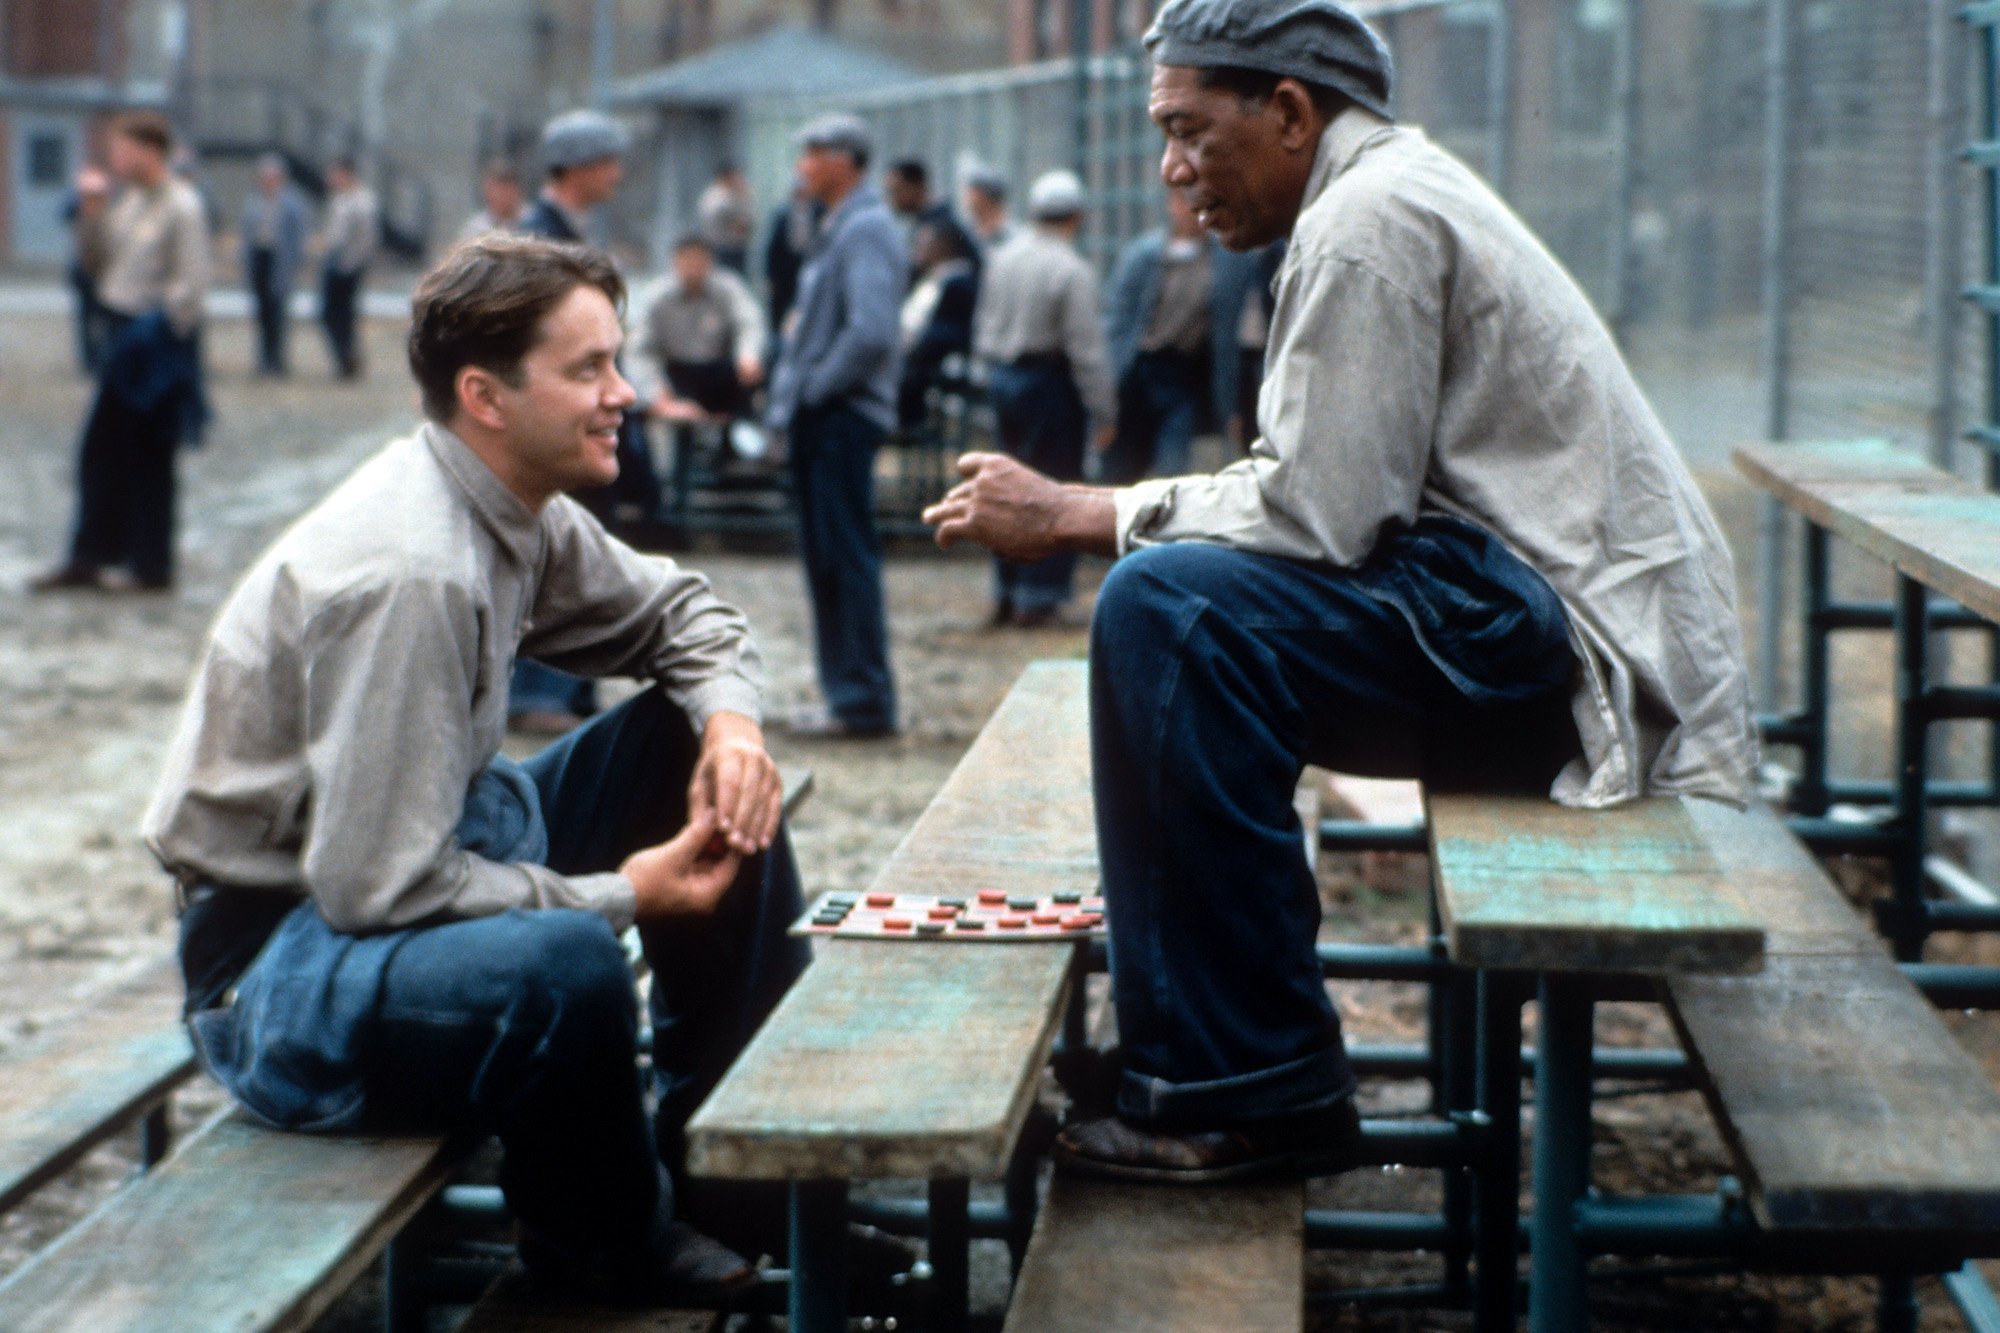 Tim Robbins and Morgan Freeman in a scene from 'The Shawshank Redemption'